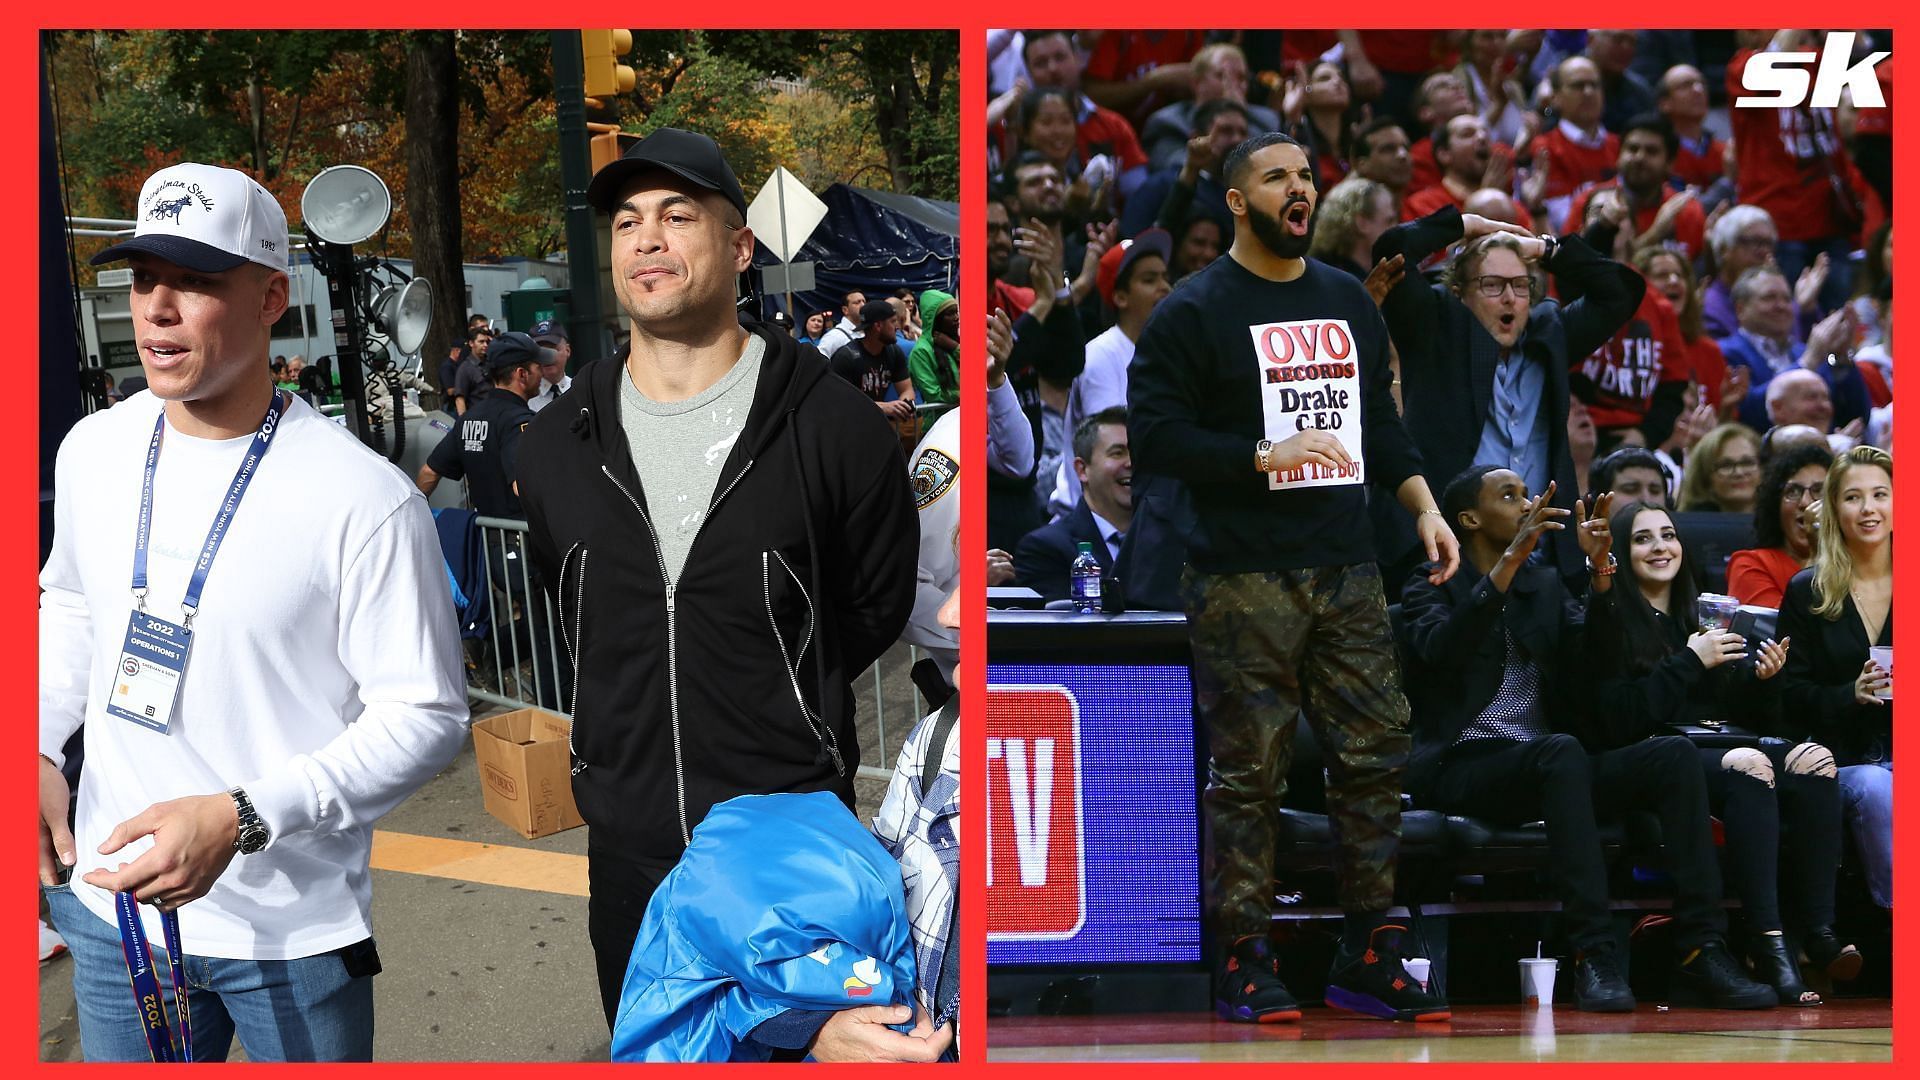 Aaron Judge and Giancarlo Stanton were spotted at a Drake concert